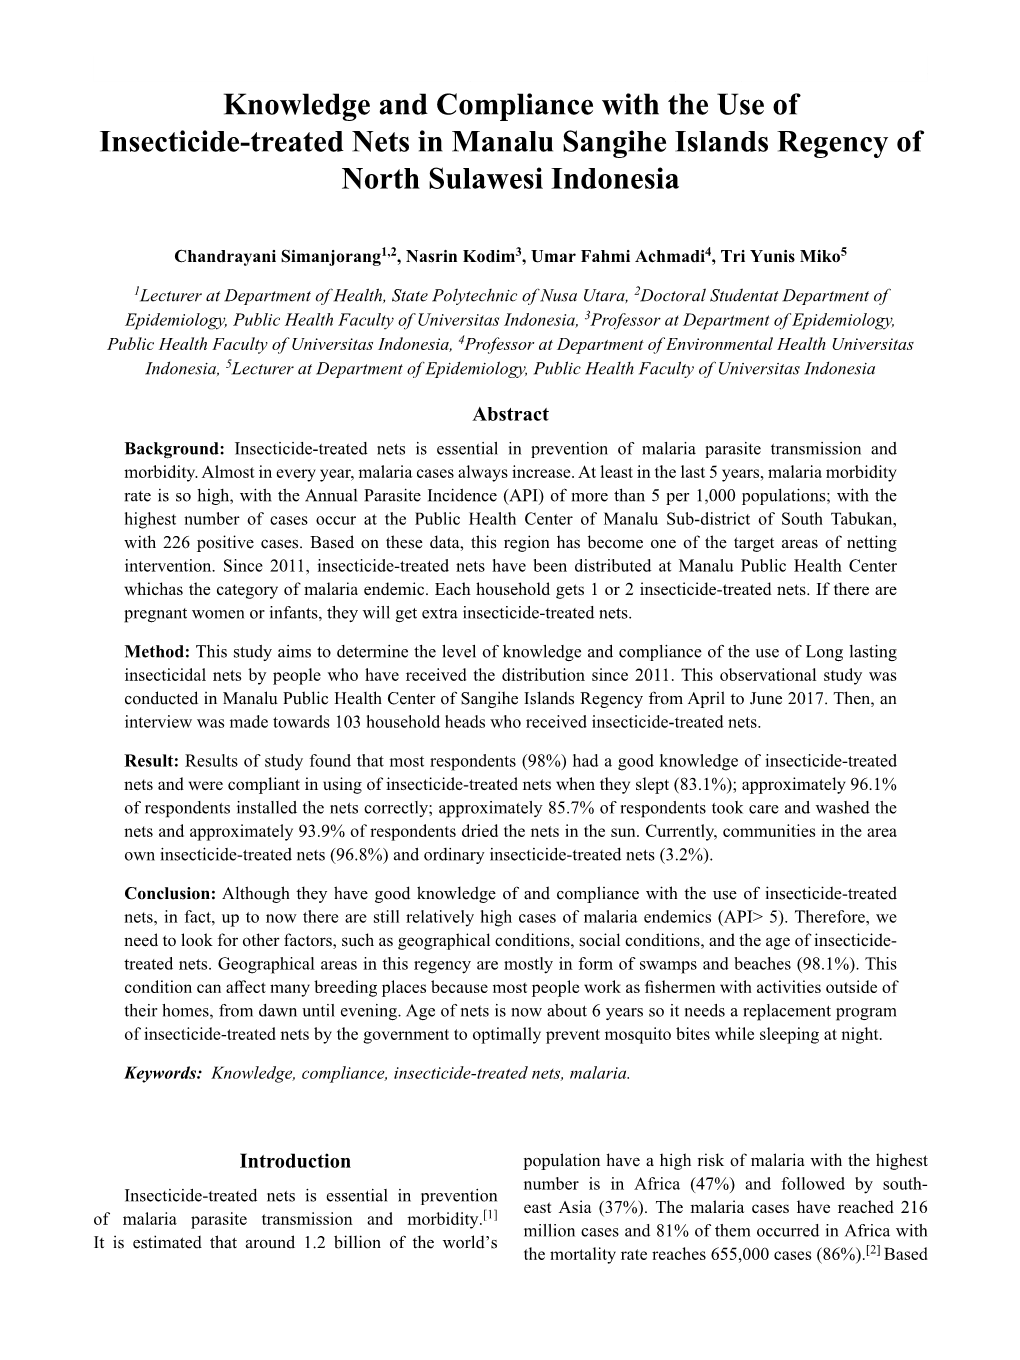 Knowledge and Compliance with the Use of Insecticide-Treated Nets in Manalu Sangihe Islands Regency of North Sulawesi Indonesia